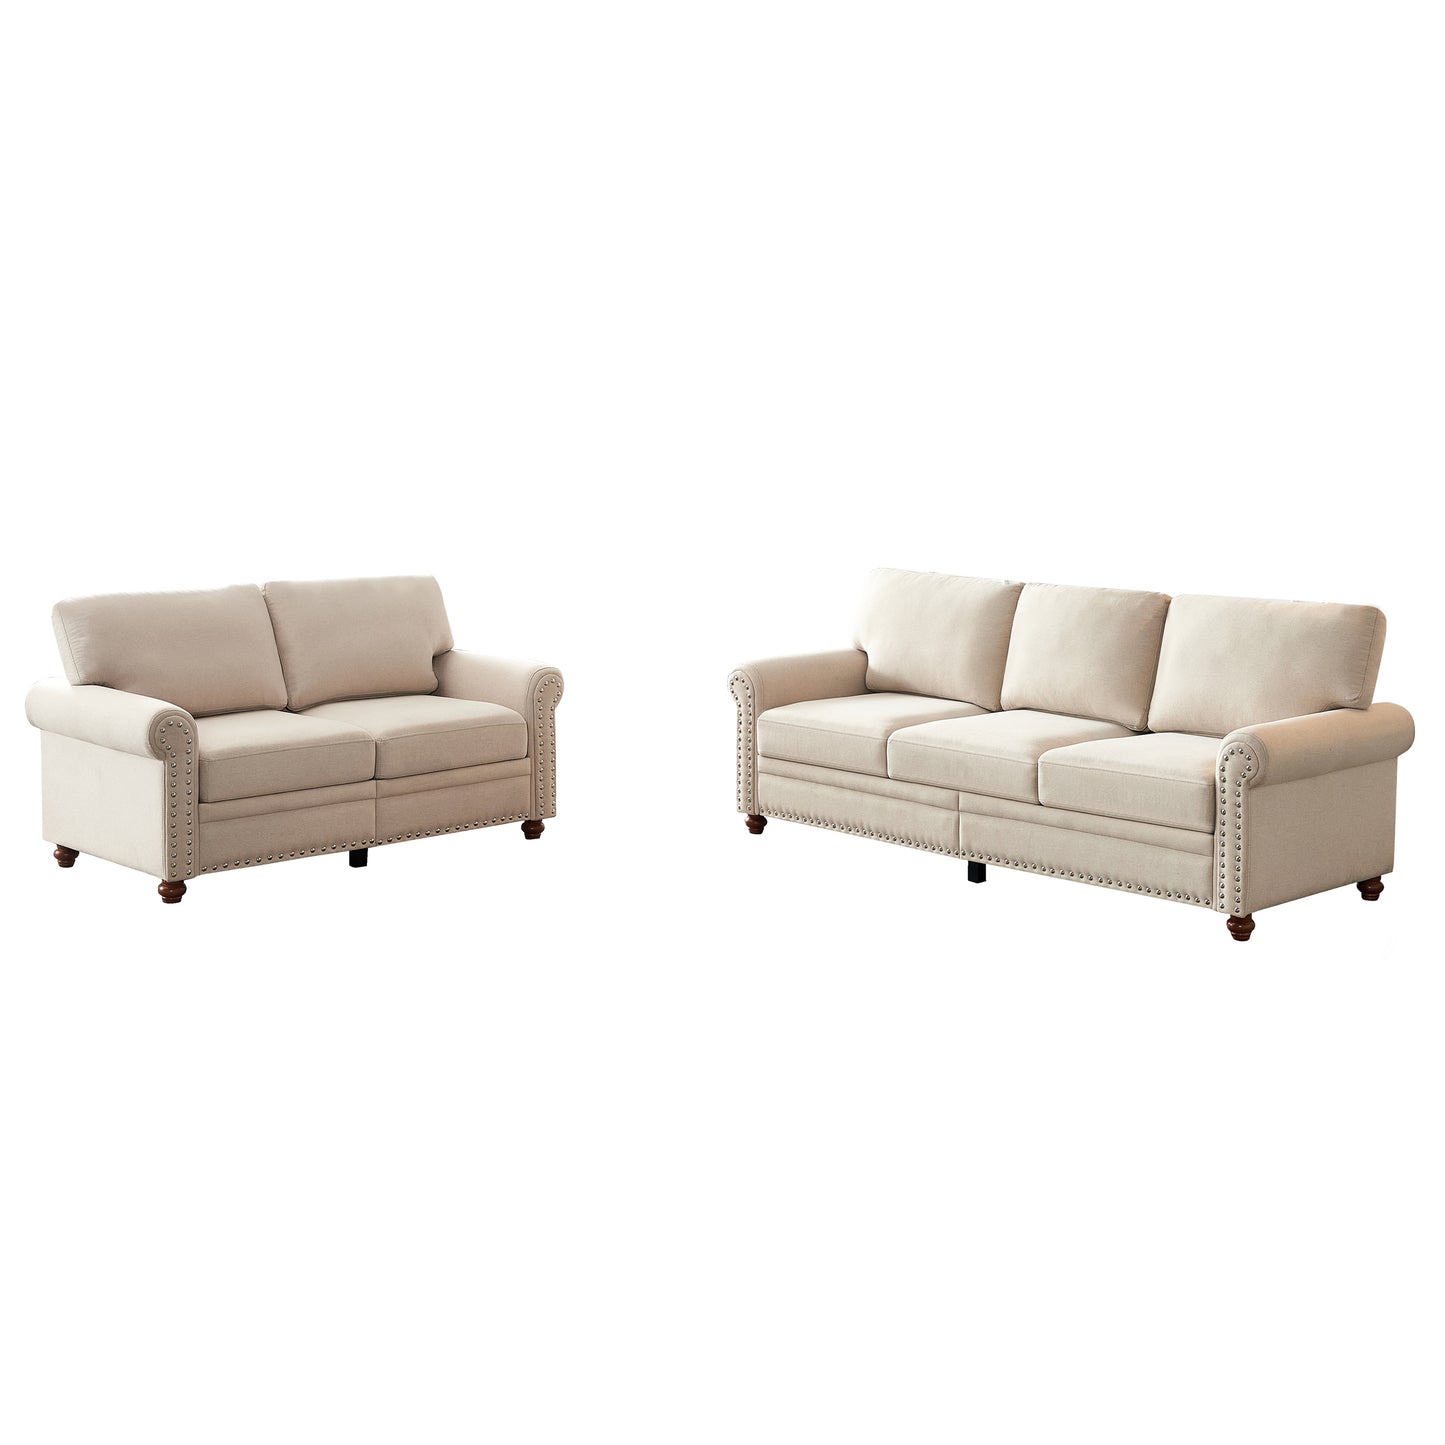 Linen Fabric Upholstery with Hidden Storage Sofa 2+3 Seater Combo (Beige)